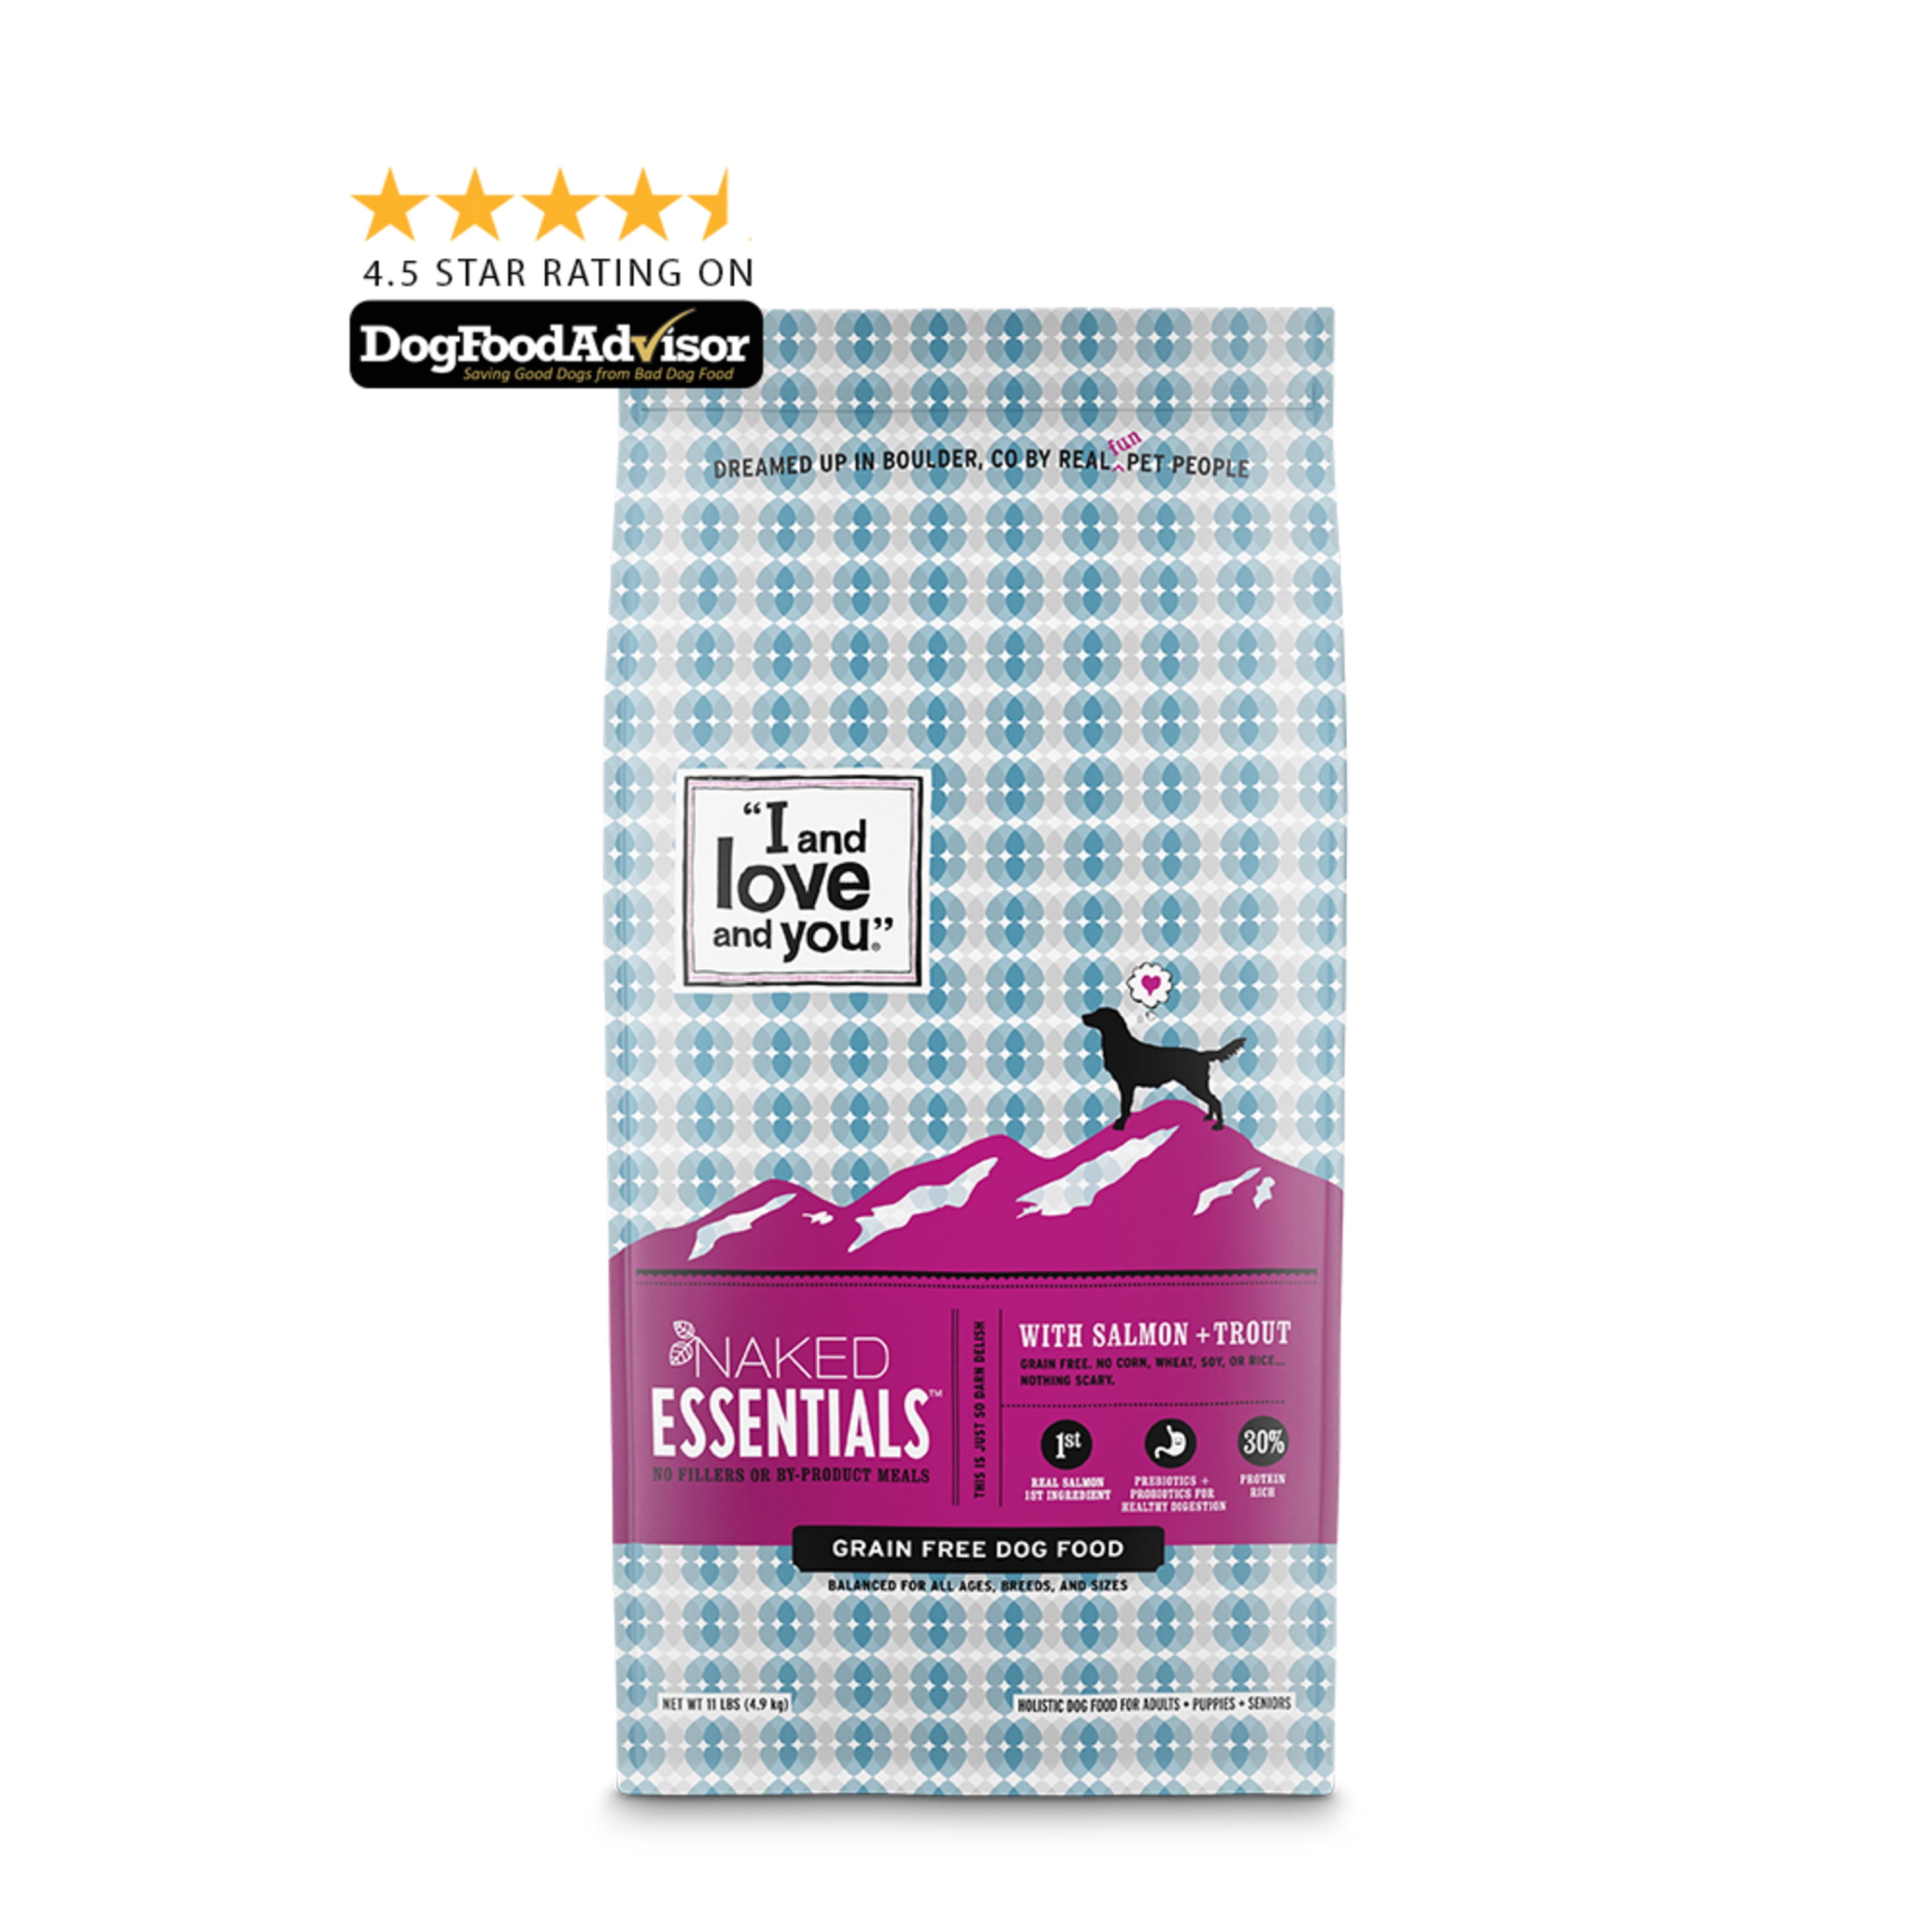 "I and love and you" Naked Essentials Dry Dog Food, GrainFree Salmon